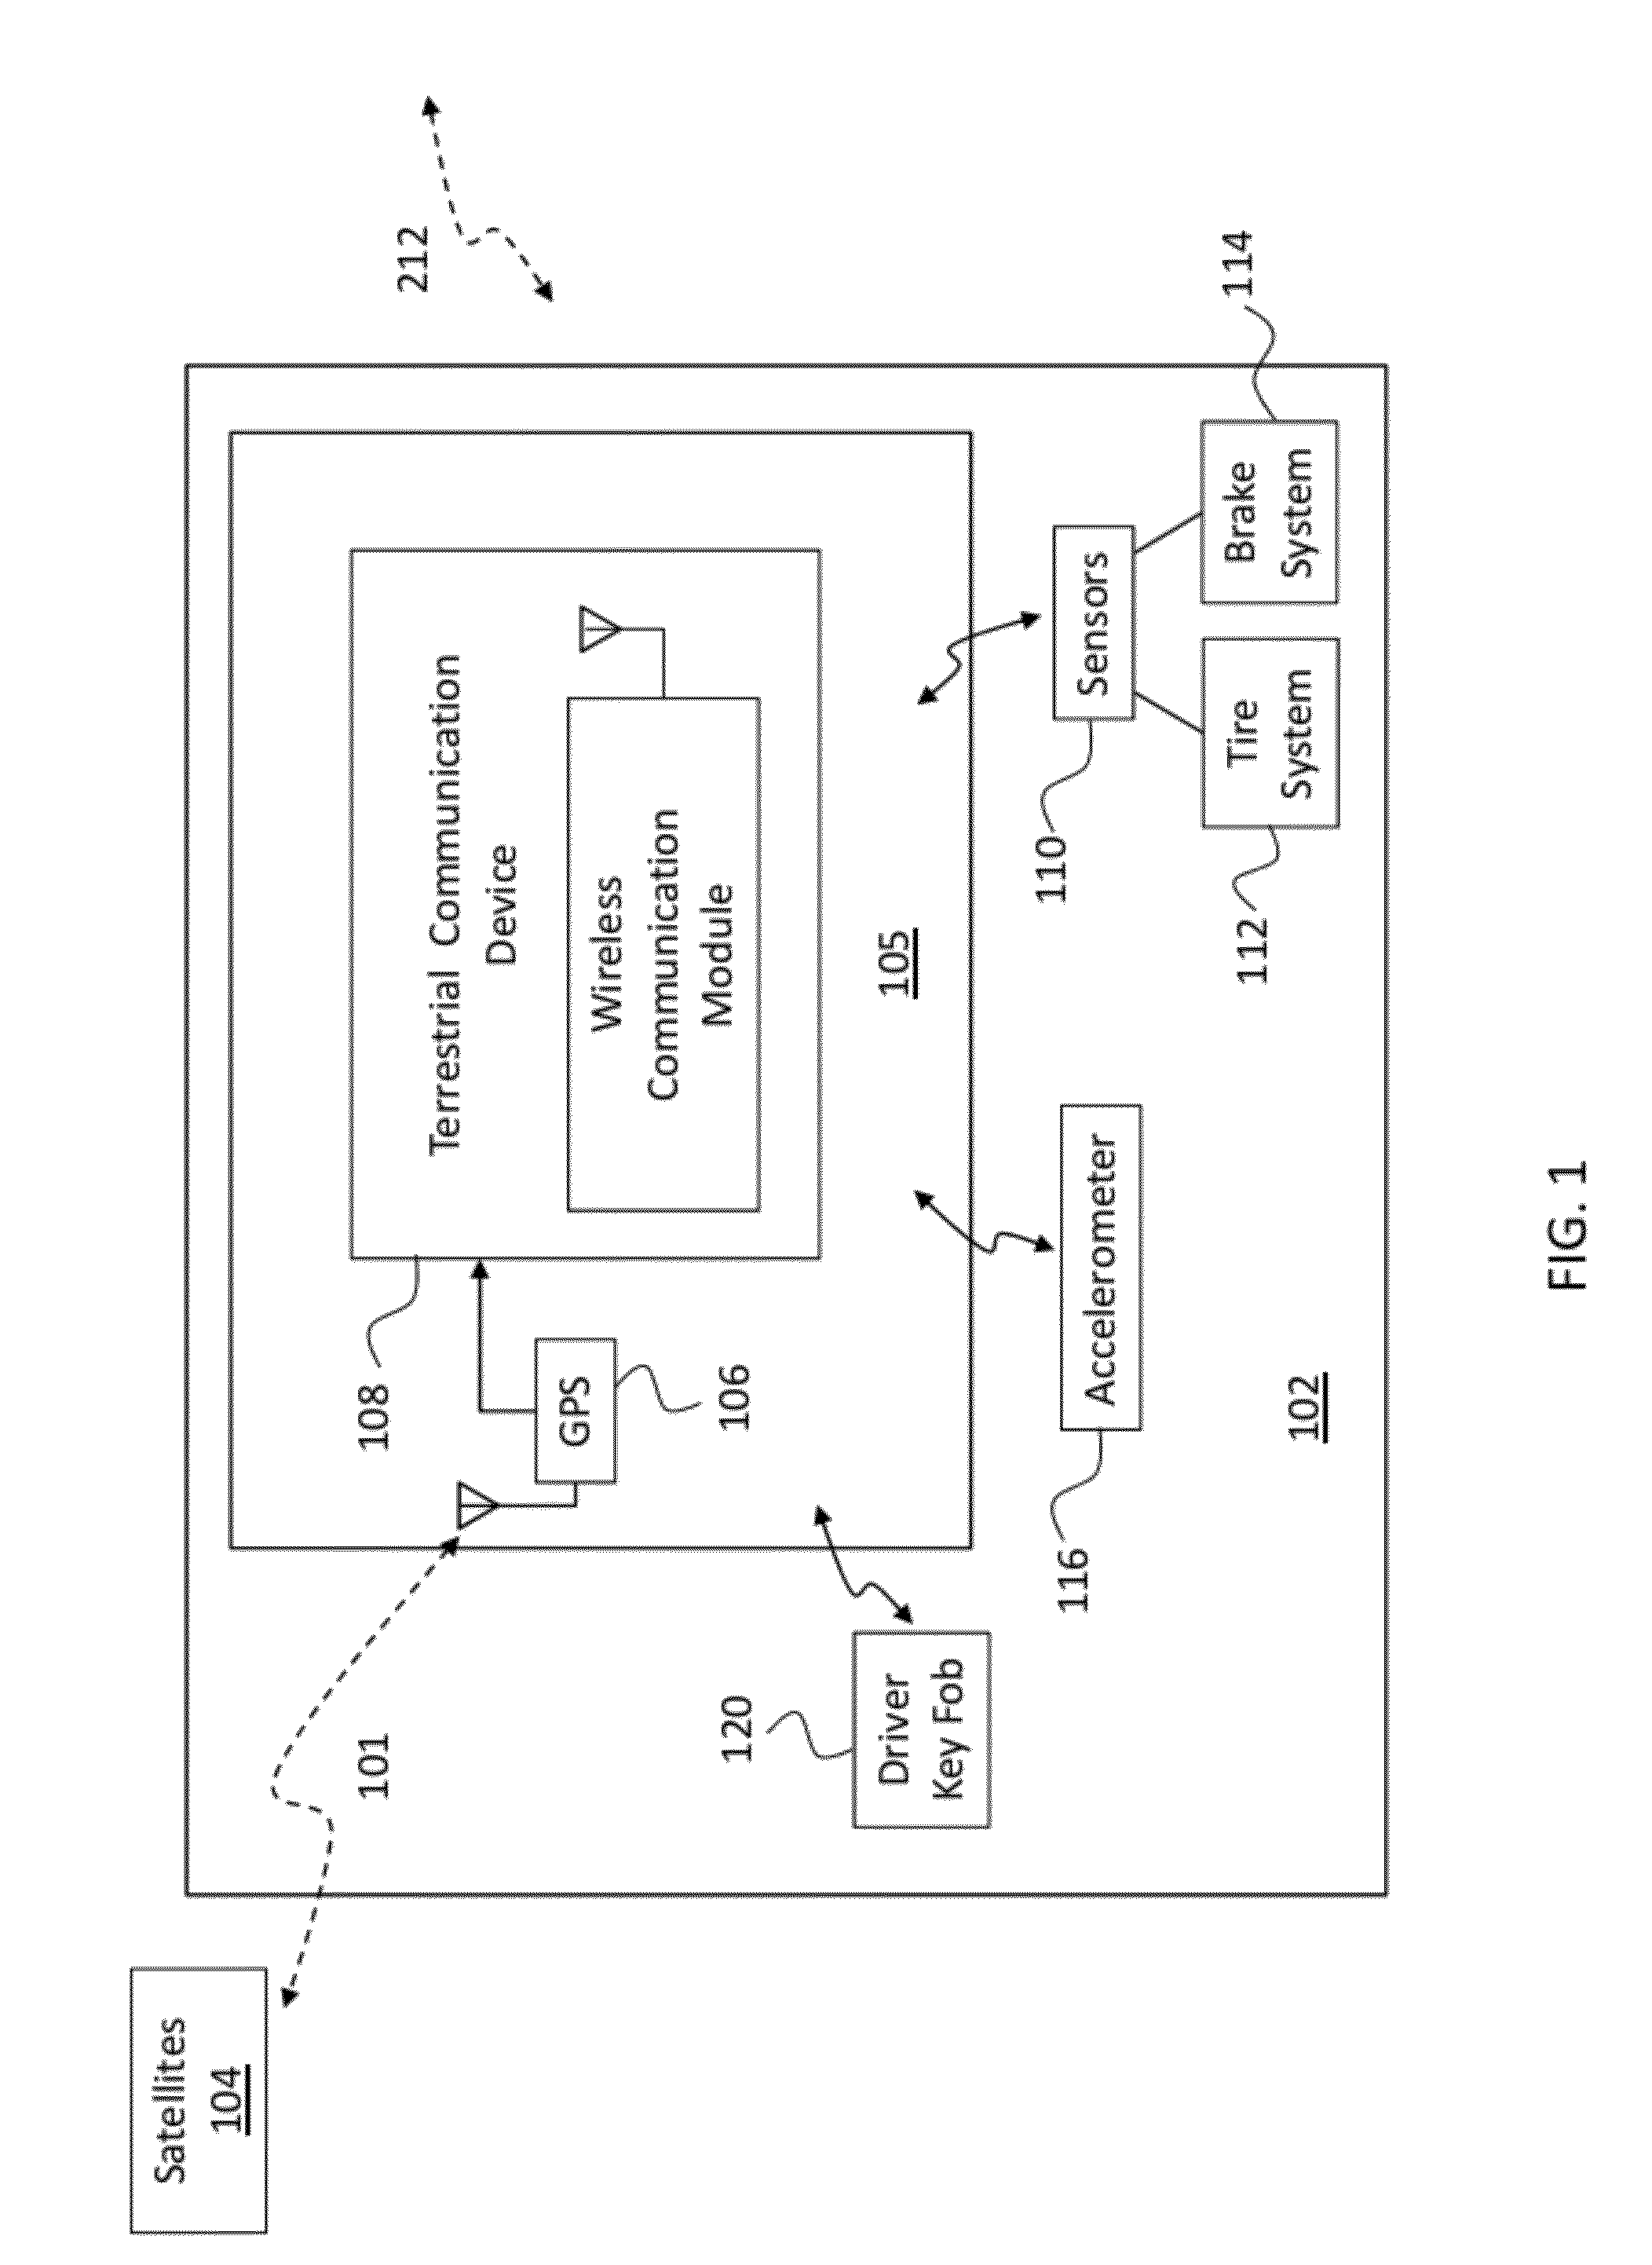 System and Method for Tracking and Sharing Driving Metrics with a Plurality of Insurance Carriers